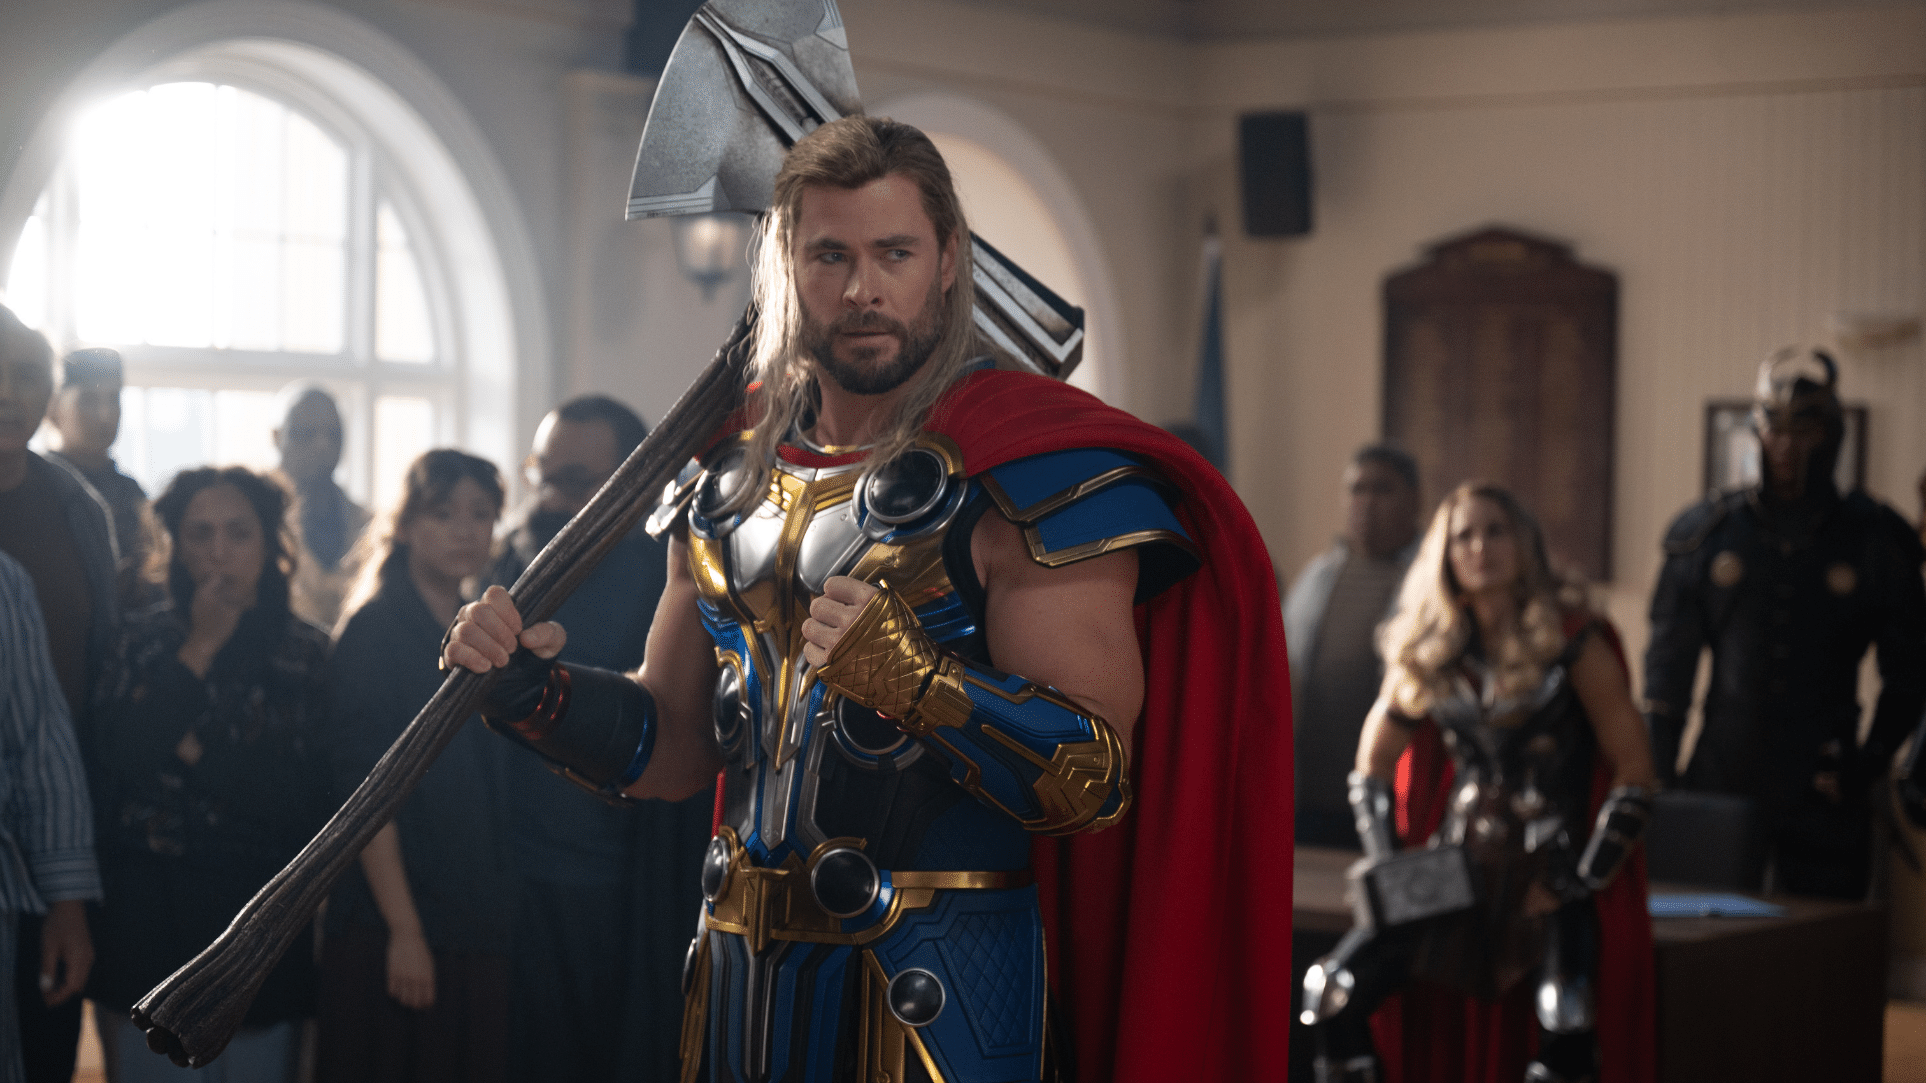 Taika Waititi And Tessa Thompson Can't Believe How Bad The CGI Looks In  This 'Thor: Love And Thunder' Scene